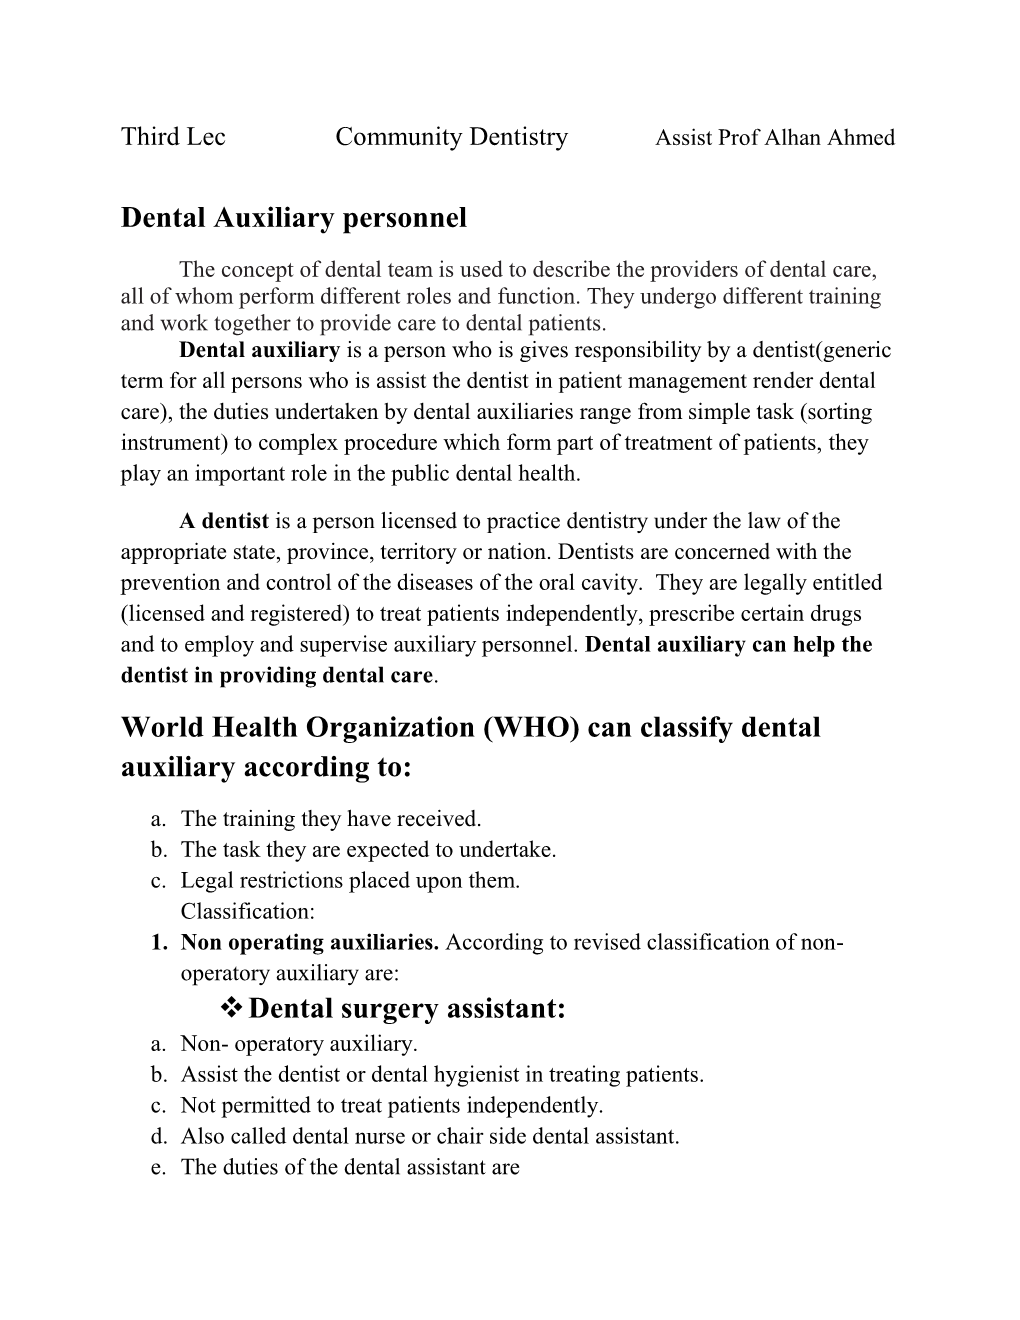 Dental Auxiliary Personnel World Health Organization (WHO) Can